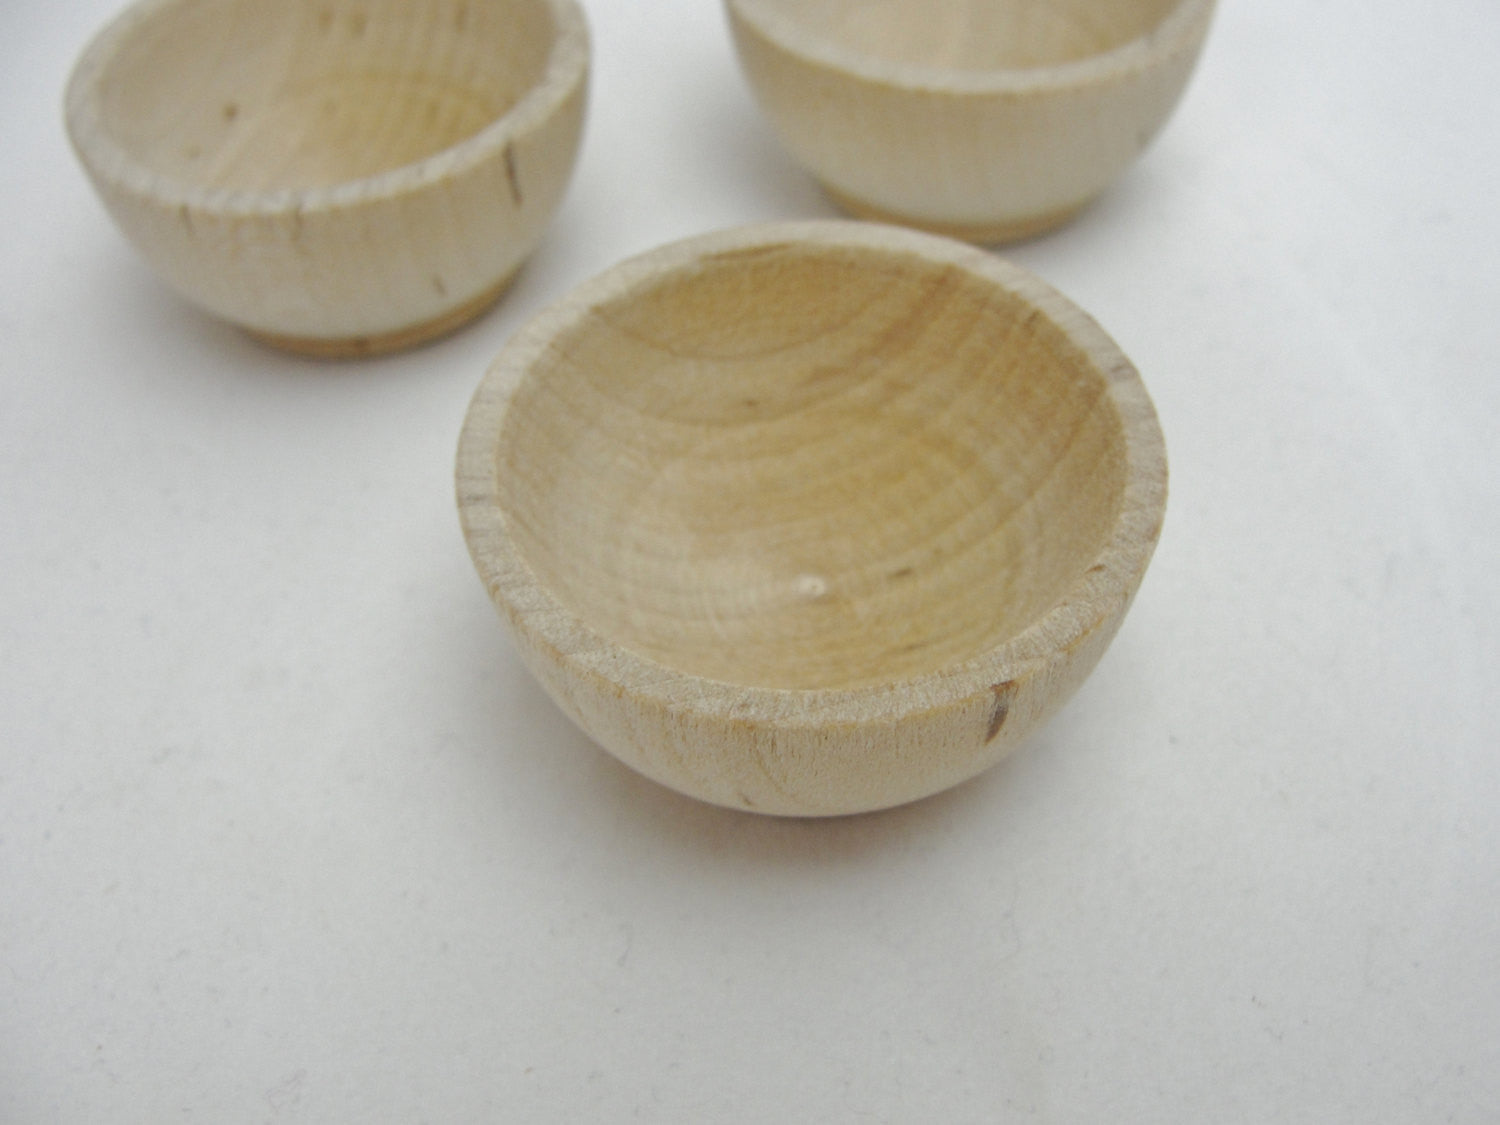 1 1/2" Miniature wooden bowl, small ring cup set of 3 - Wood parts - Craft Supply House